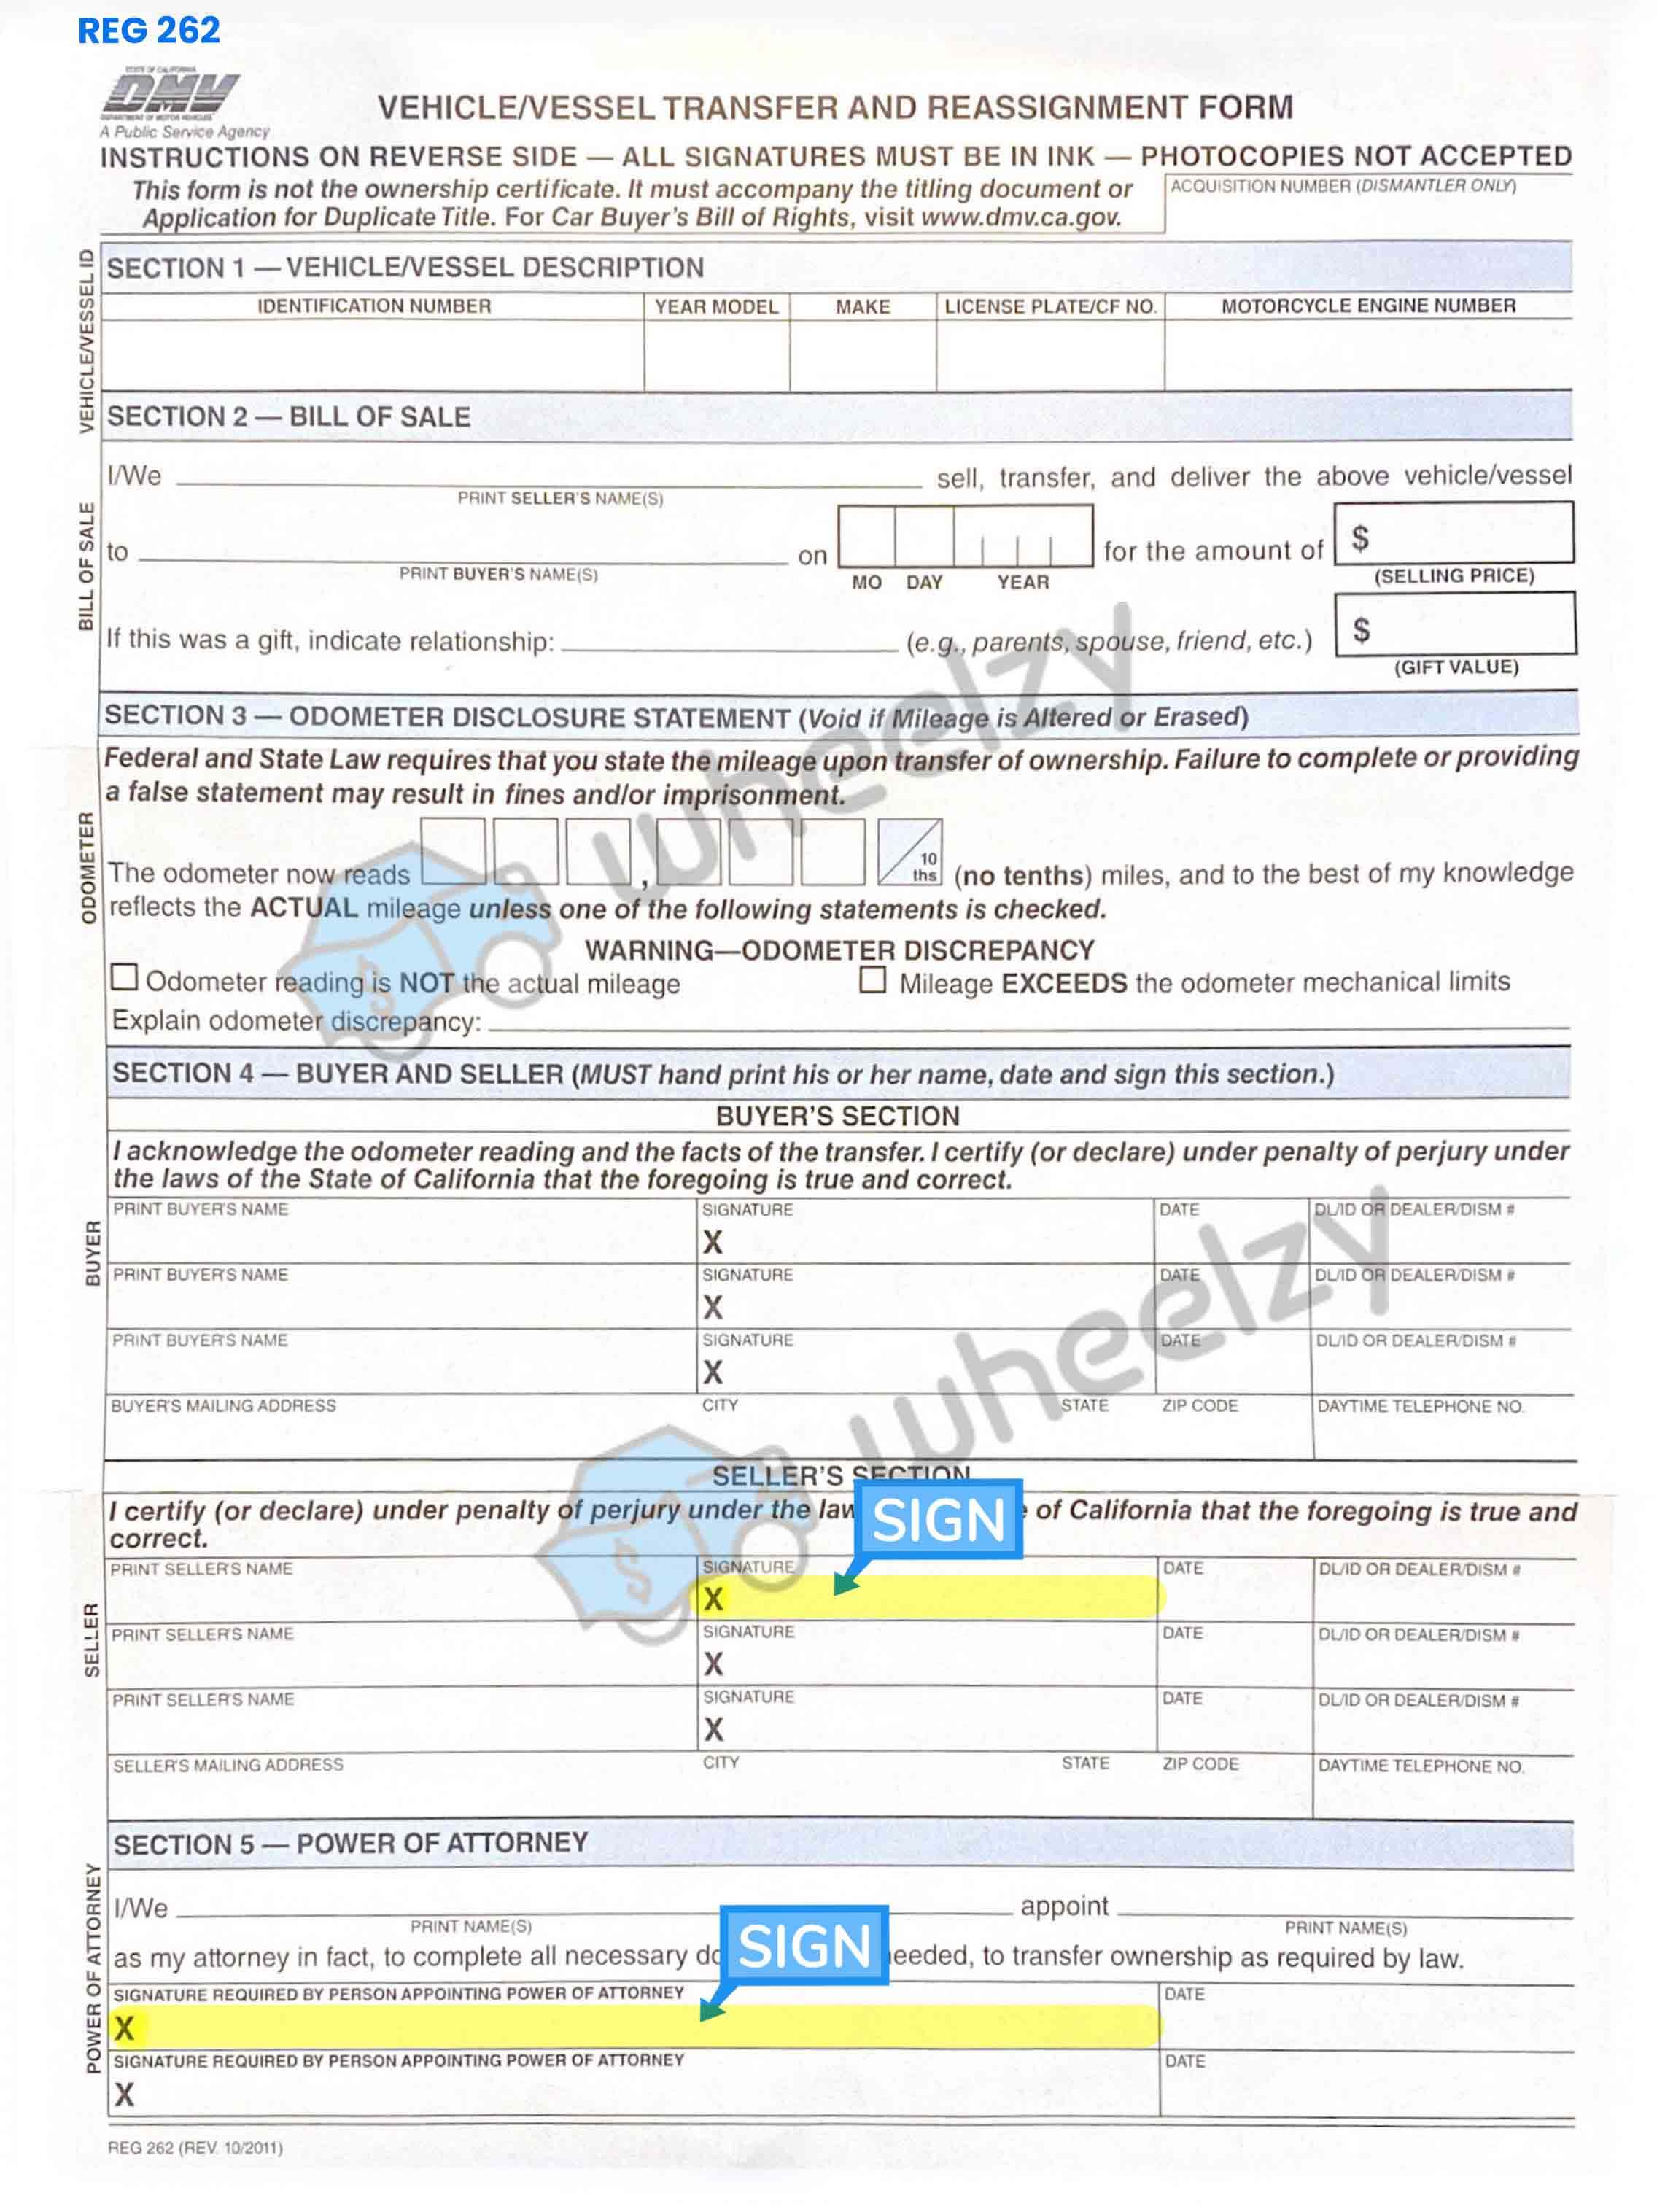 How to Sign Your REG Forms in Los Angeles